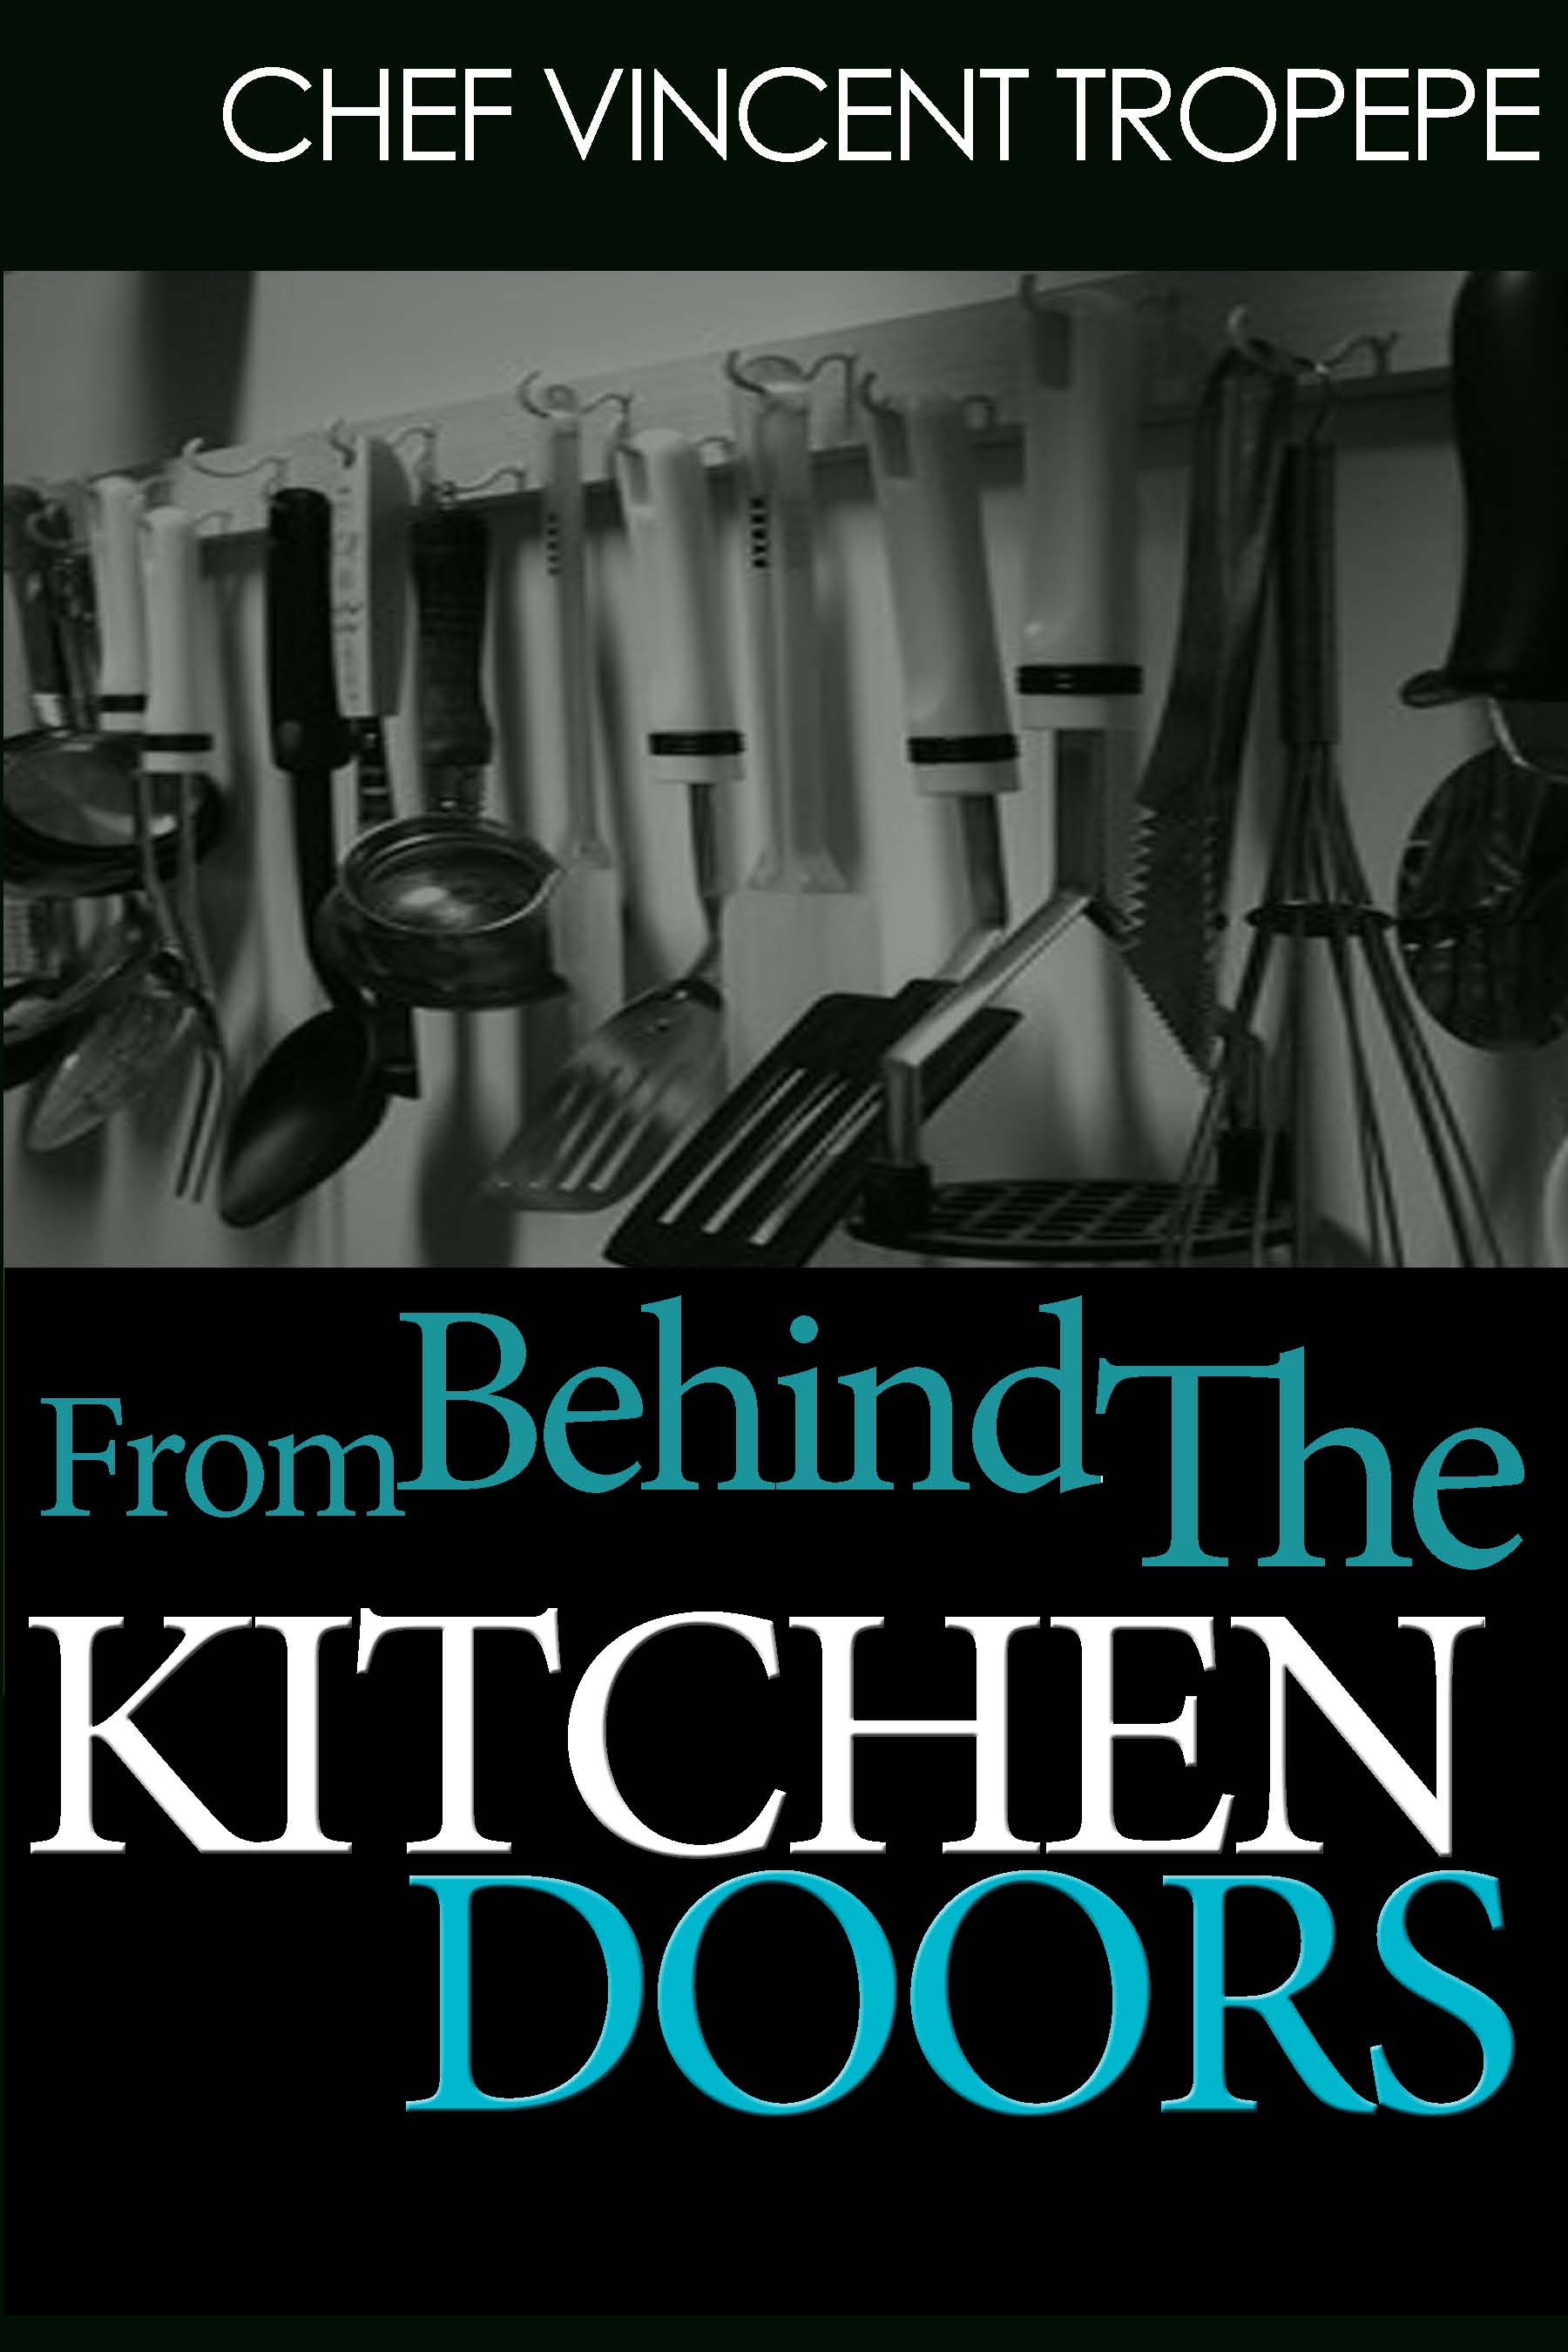 Book Launch & Biscotti Tasting: From Behind the Kitchen Doors by Vincent Tropepe